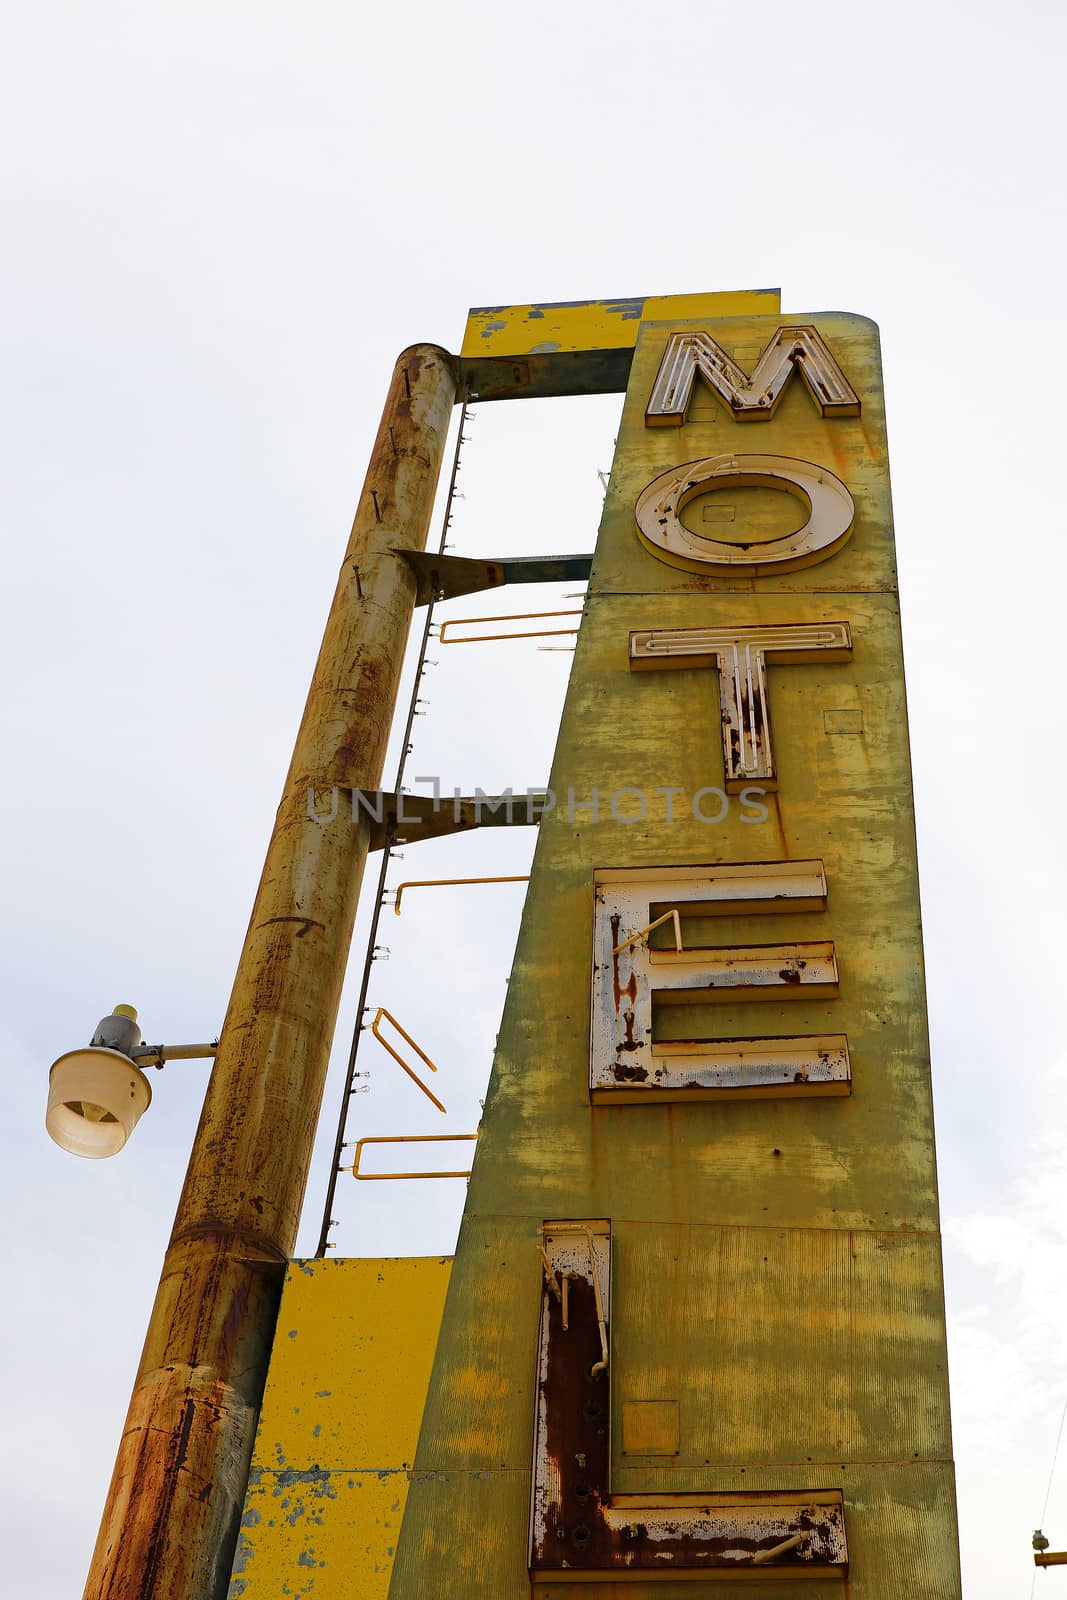 Old Motel sign ruin along historic Route 66 in the middle of California vast Mojave desert.